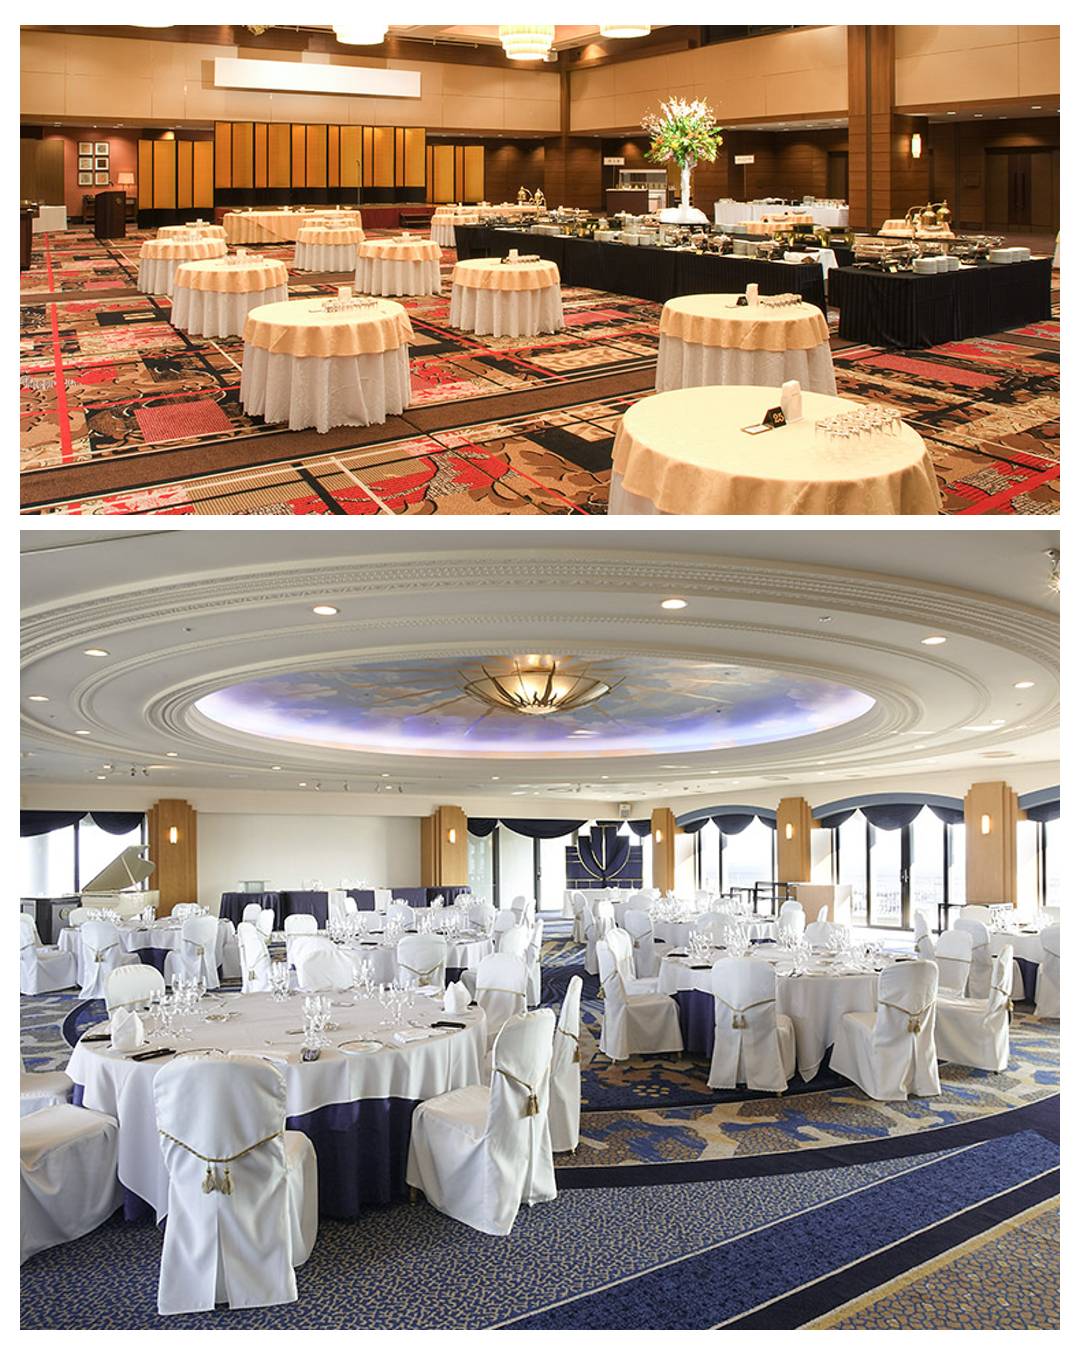 at top a warmly colored room with buffet tables and 
        small standing tables, and at bottom a banquet room with white-cloth-draped tables and chairs